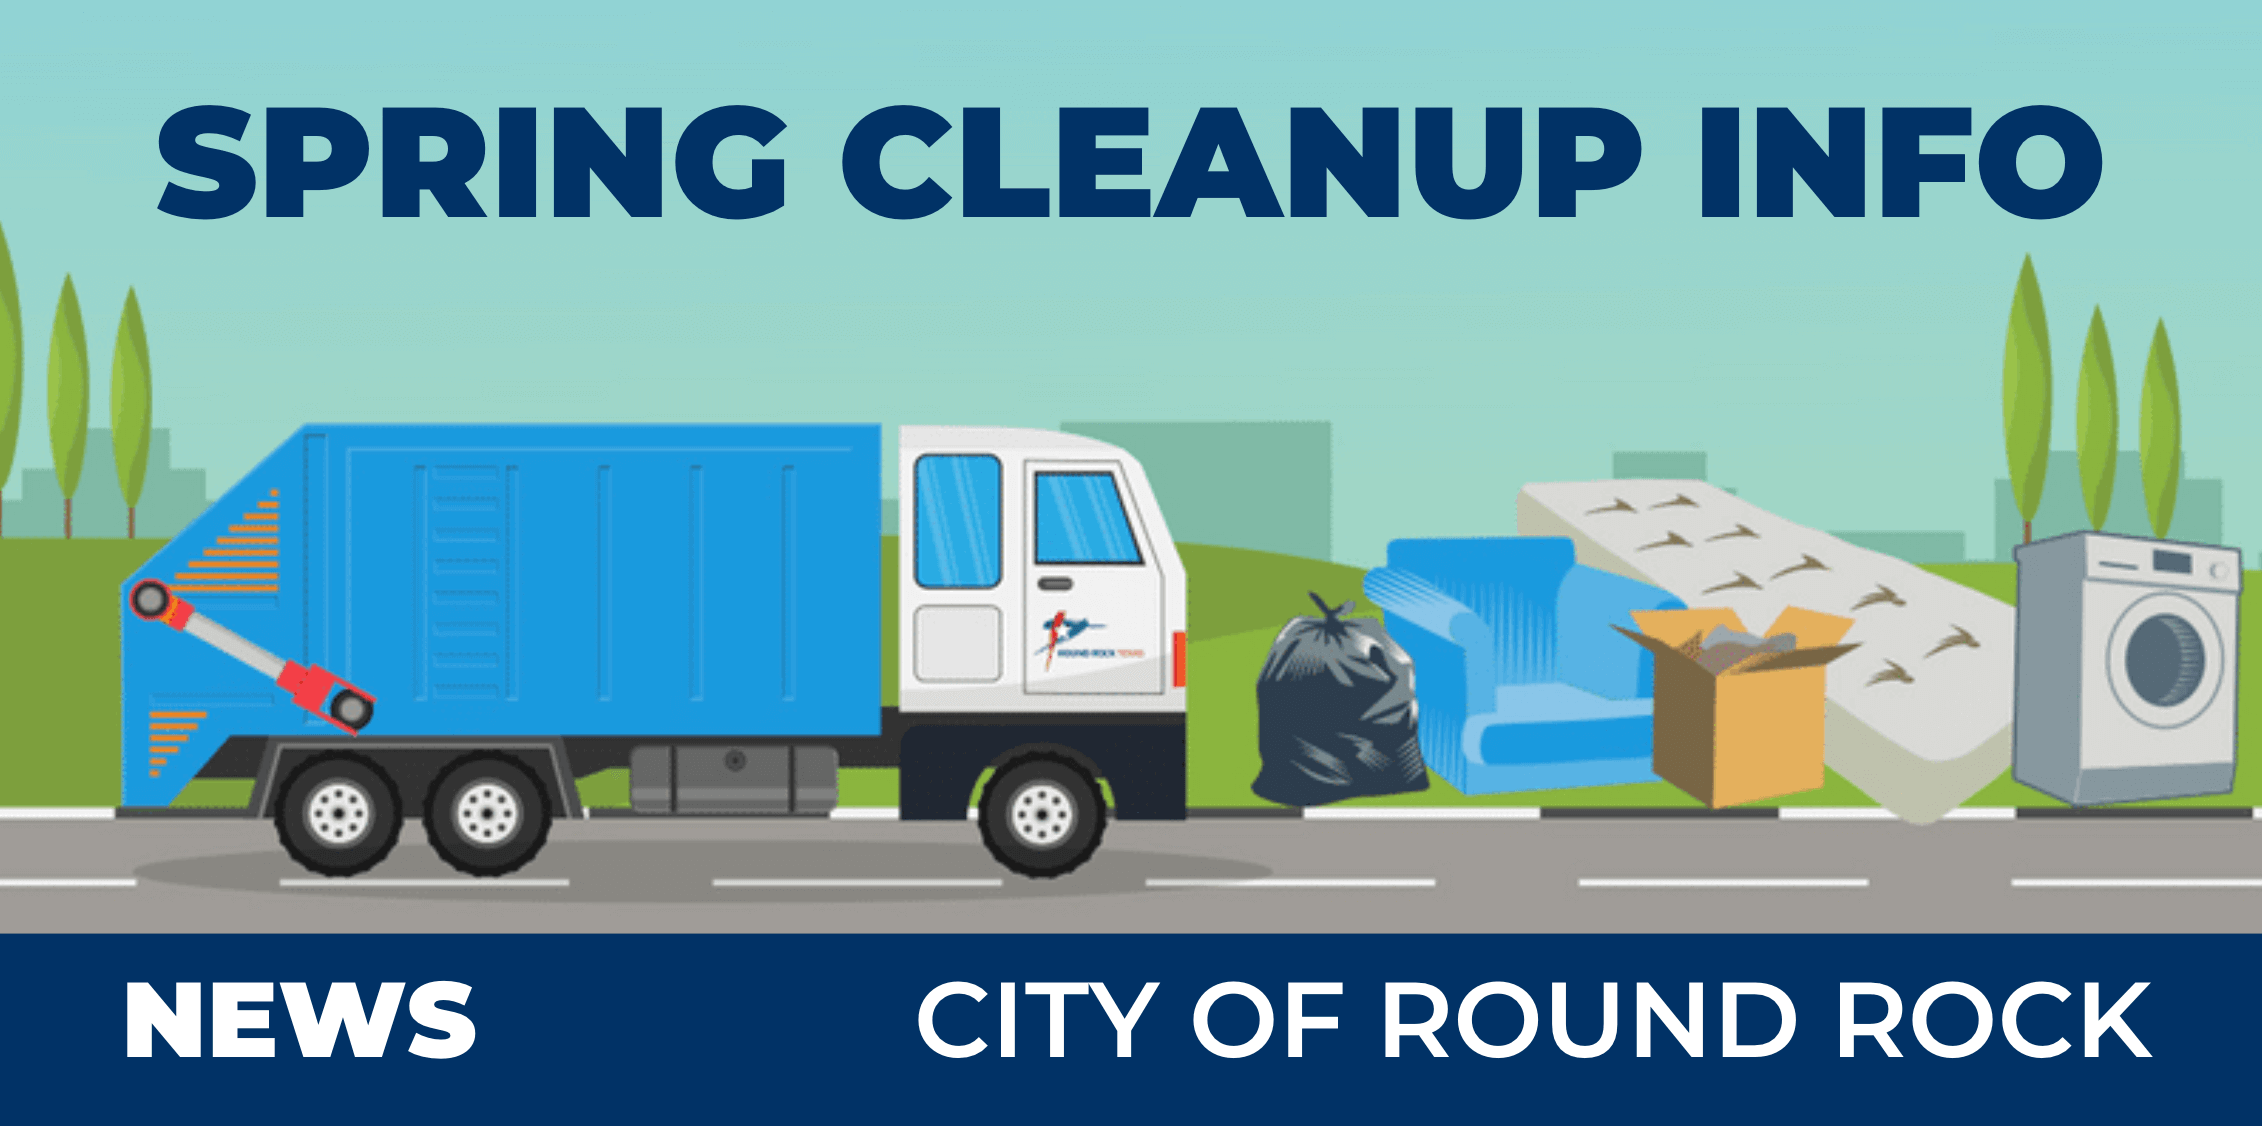 Spring CleanUp bulk item pickup to take place in April City of Round